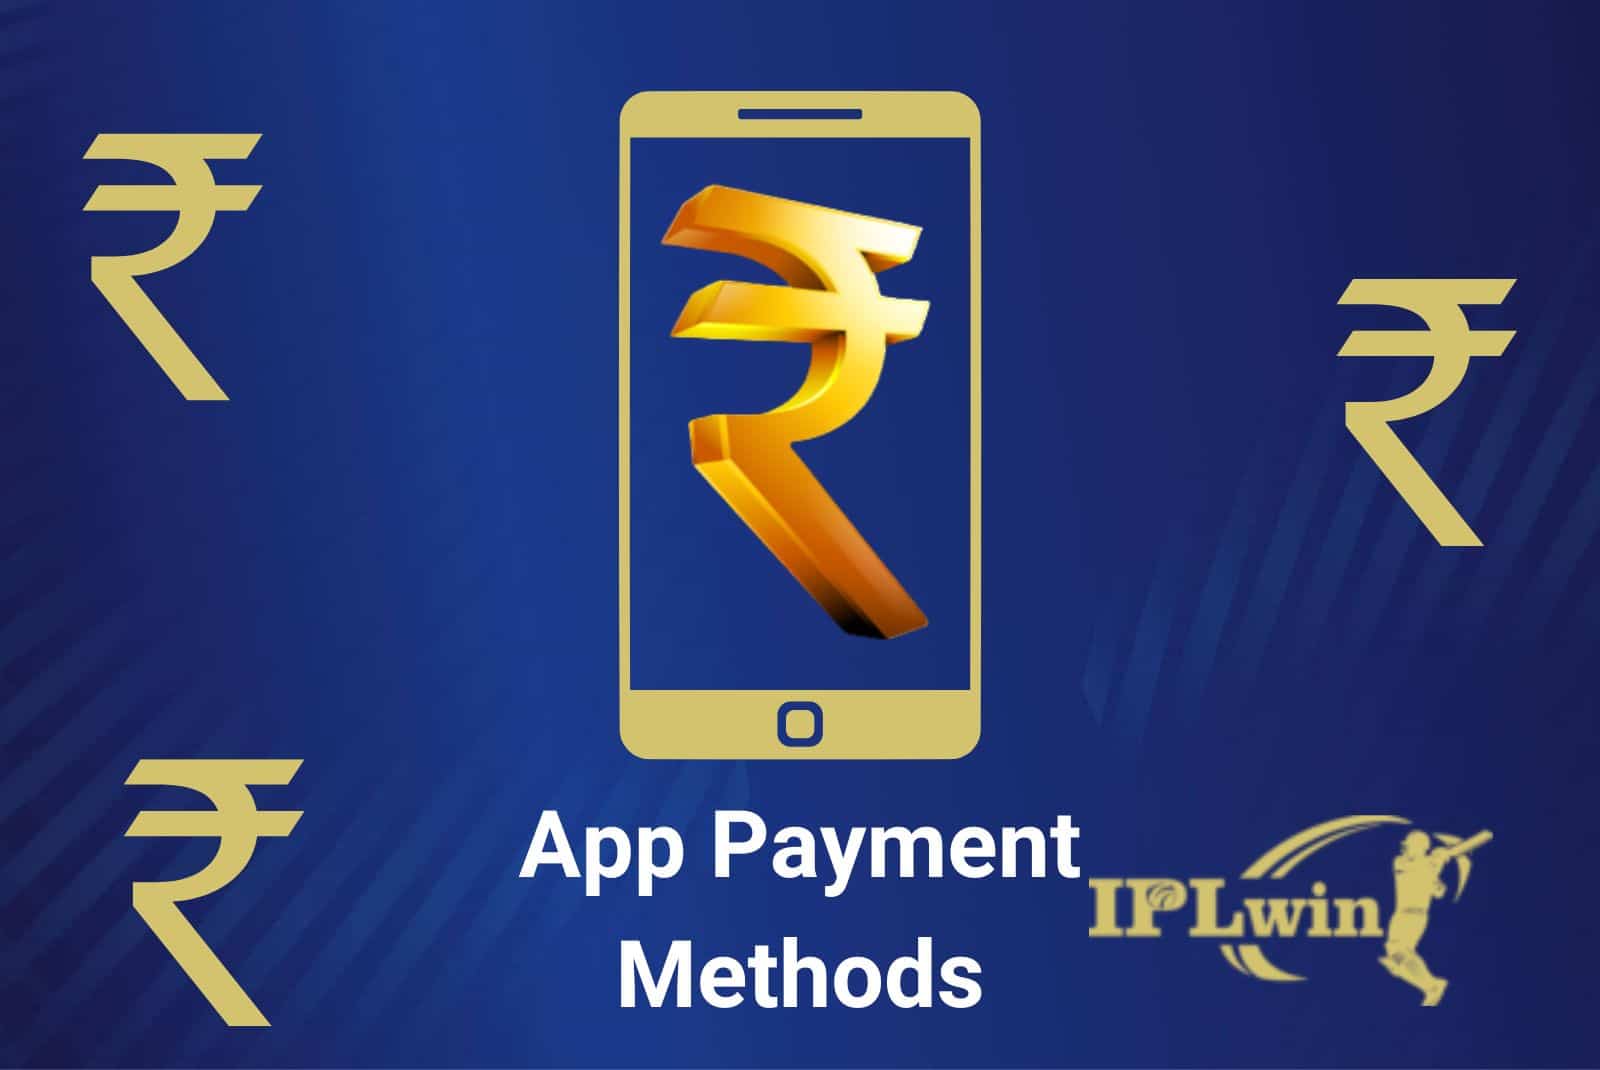 app payment methods of IPLwin India application